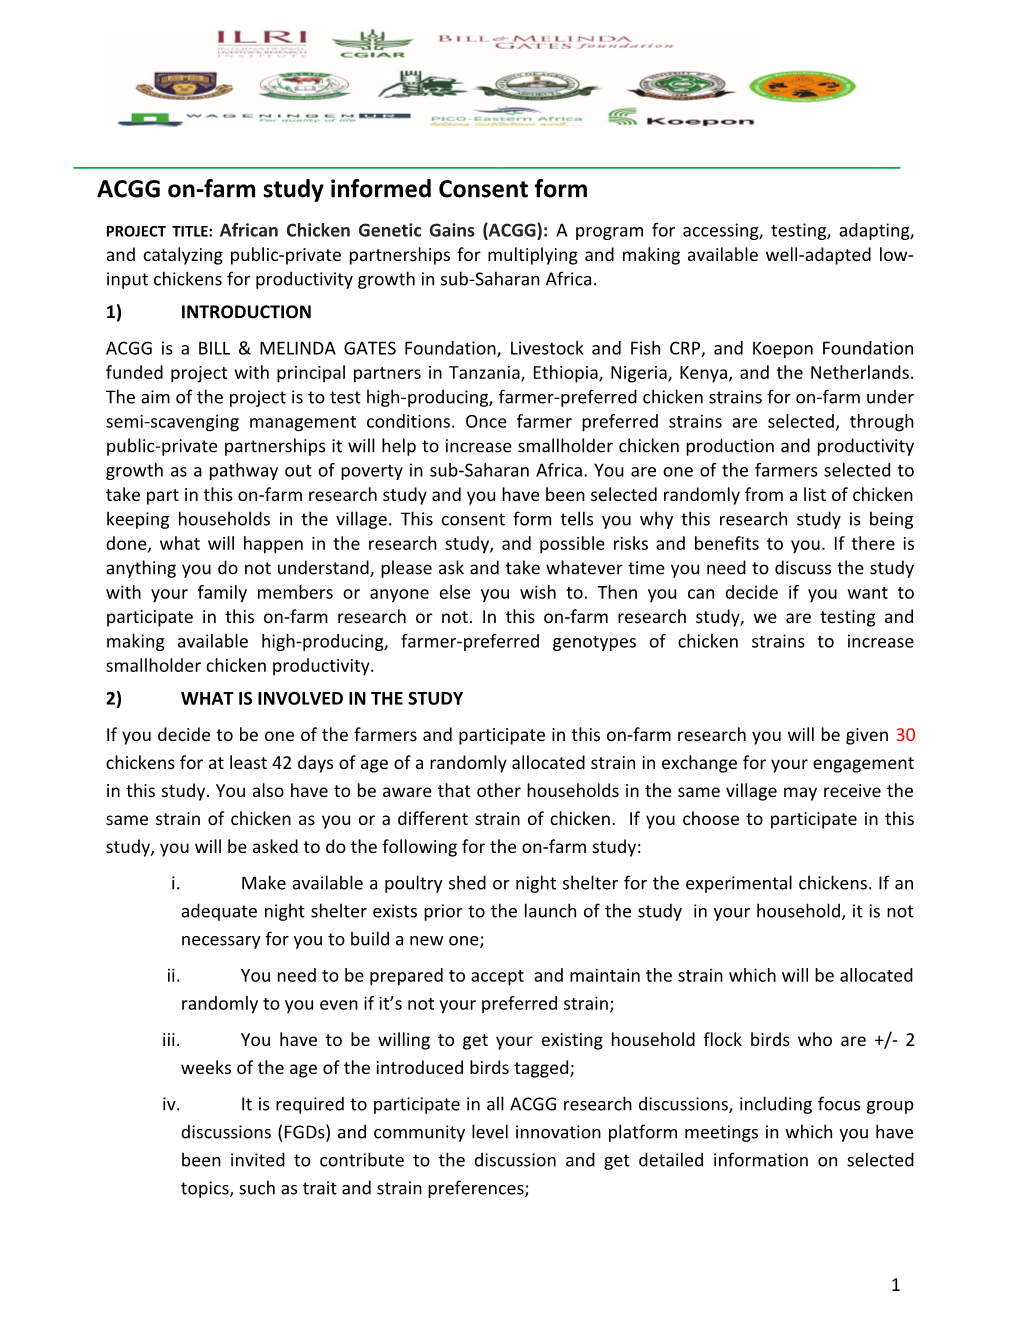 ACGG On-Farm Study Informed Consent Form